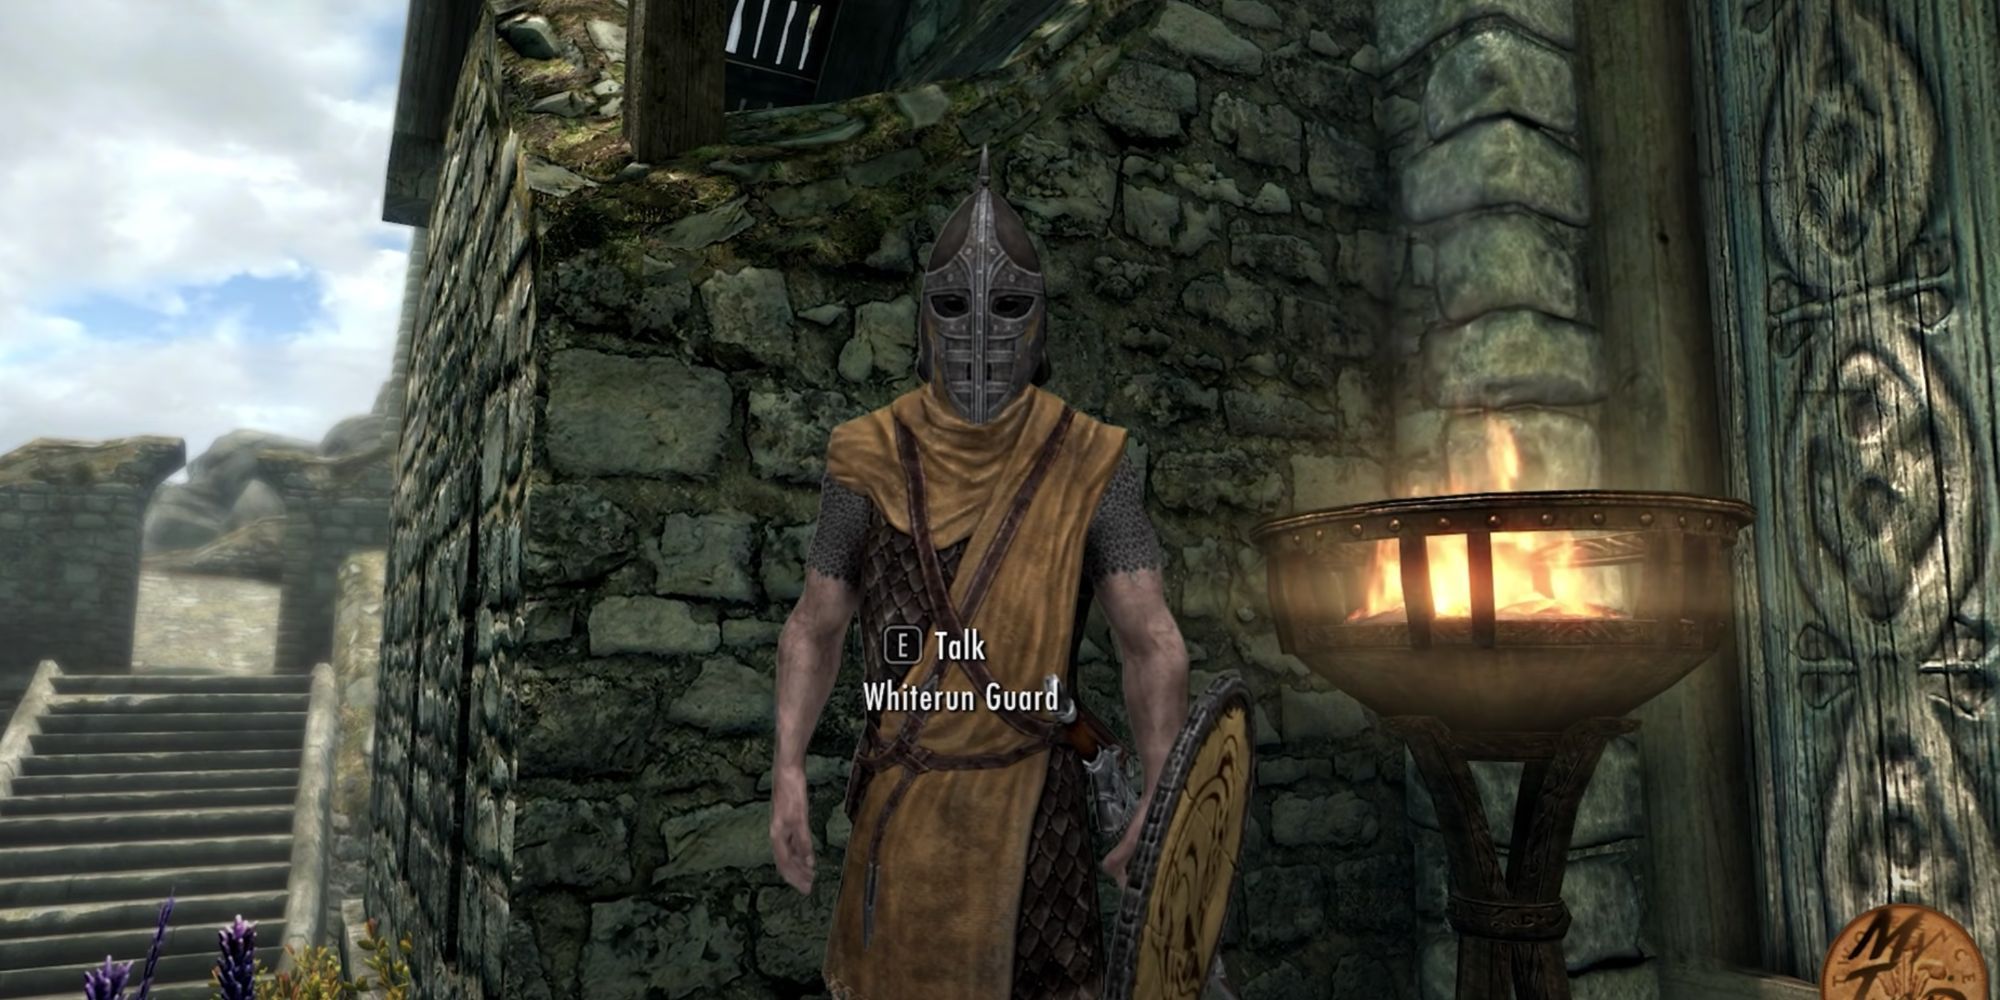 20 Quotes From Skyrim That Are Absolutely Hilarious